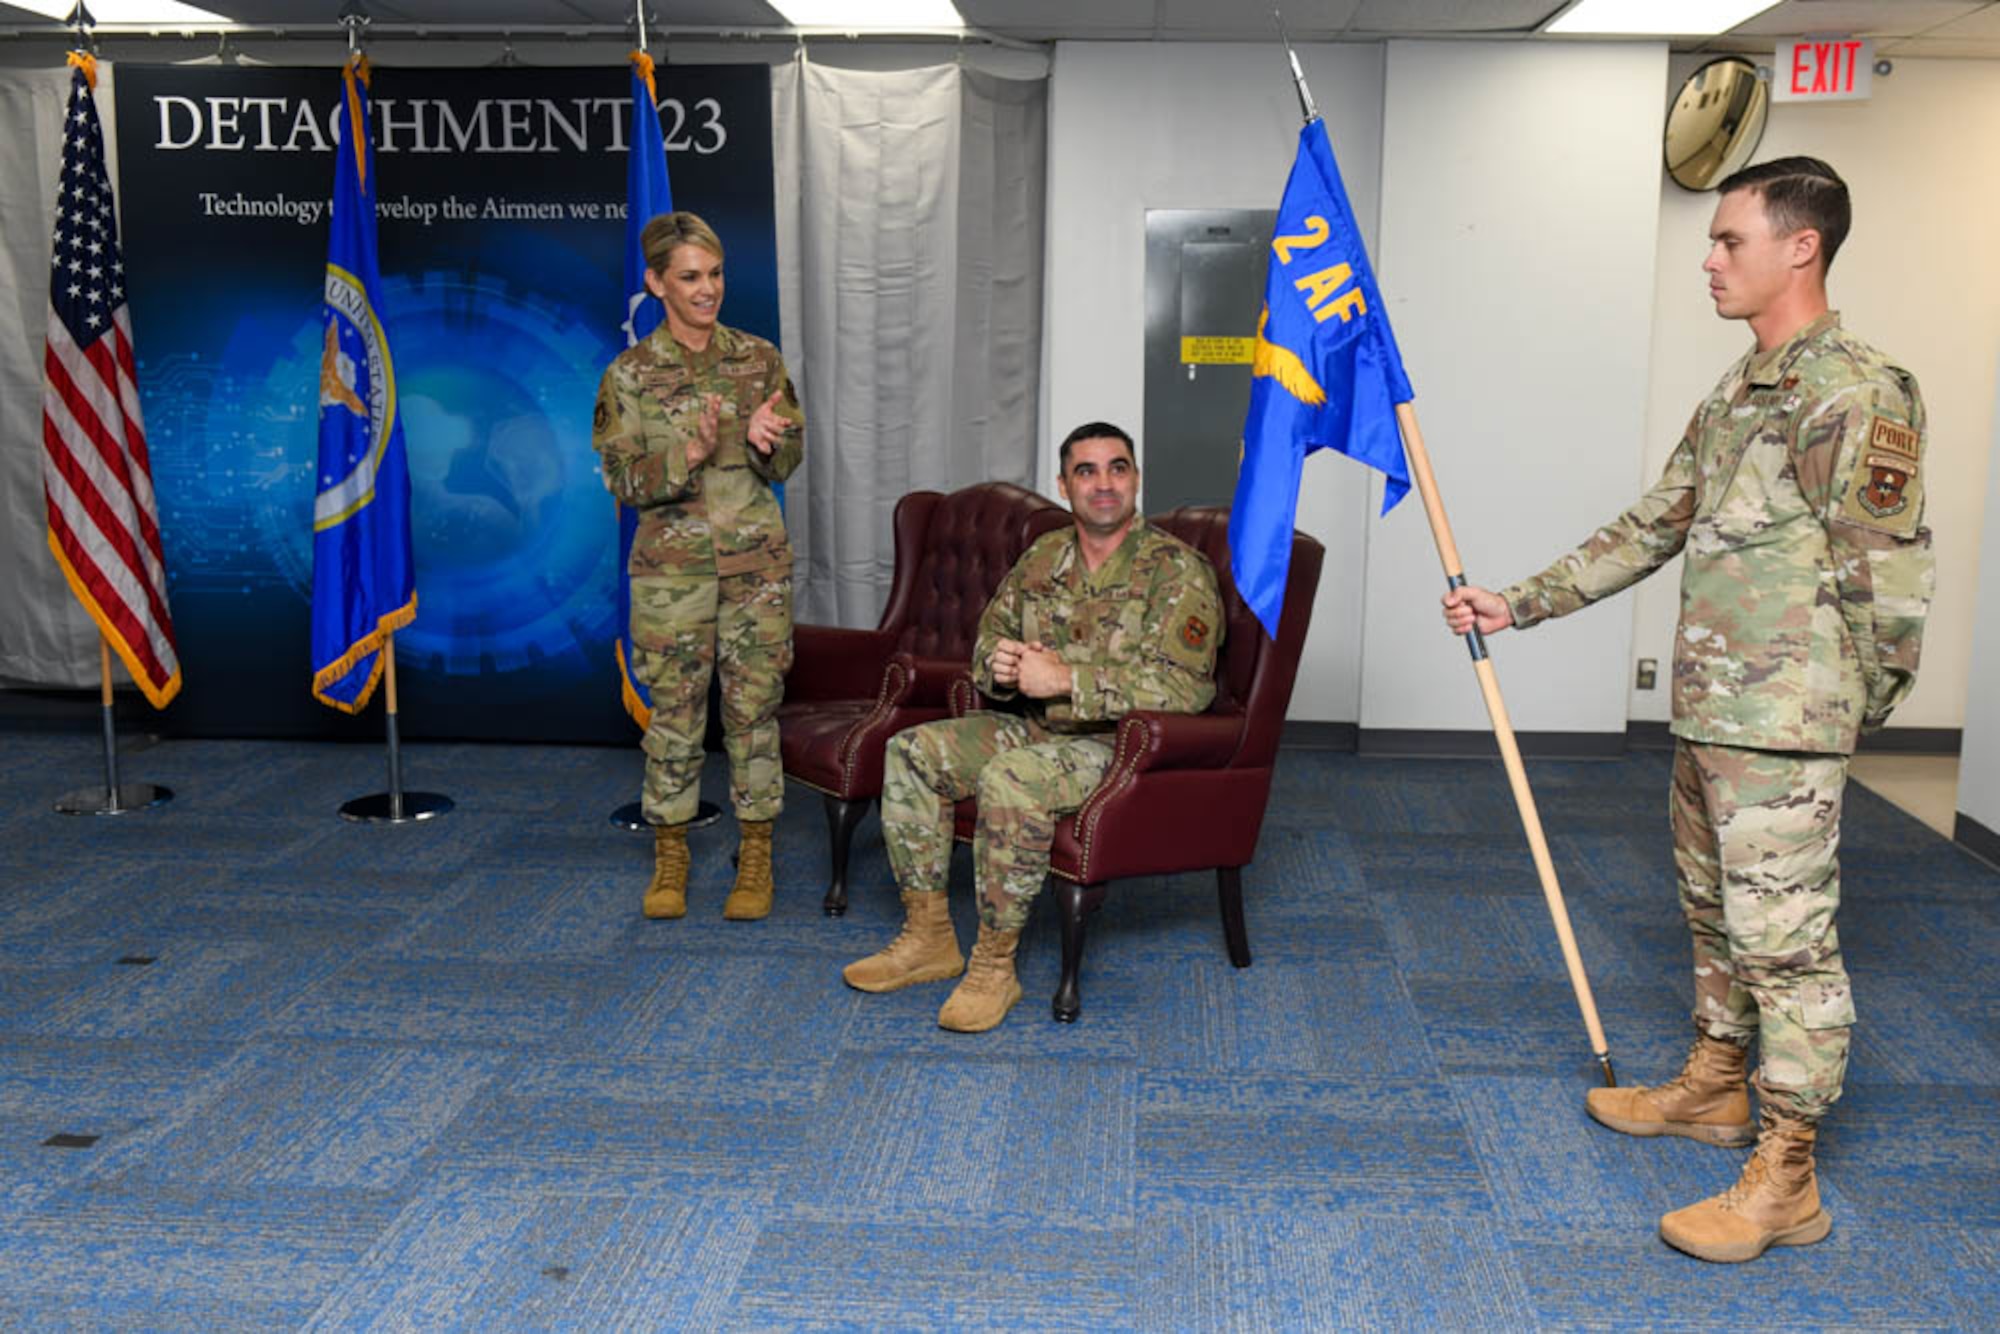 U.S. Air Force Maj. Gen. Michele Edmondson, left, Second Air Force commander, and USAF Maj. Jesse Johnson, right, Detachment 23 commander, look at the newly revealed guidon at the Det. 23. Re-alignment ceremony.